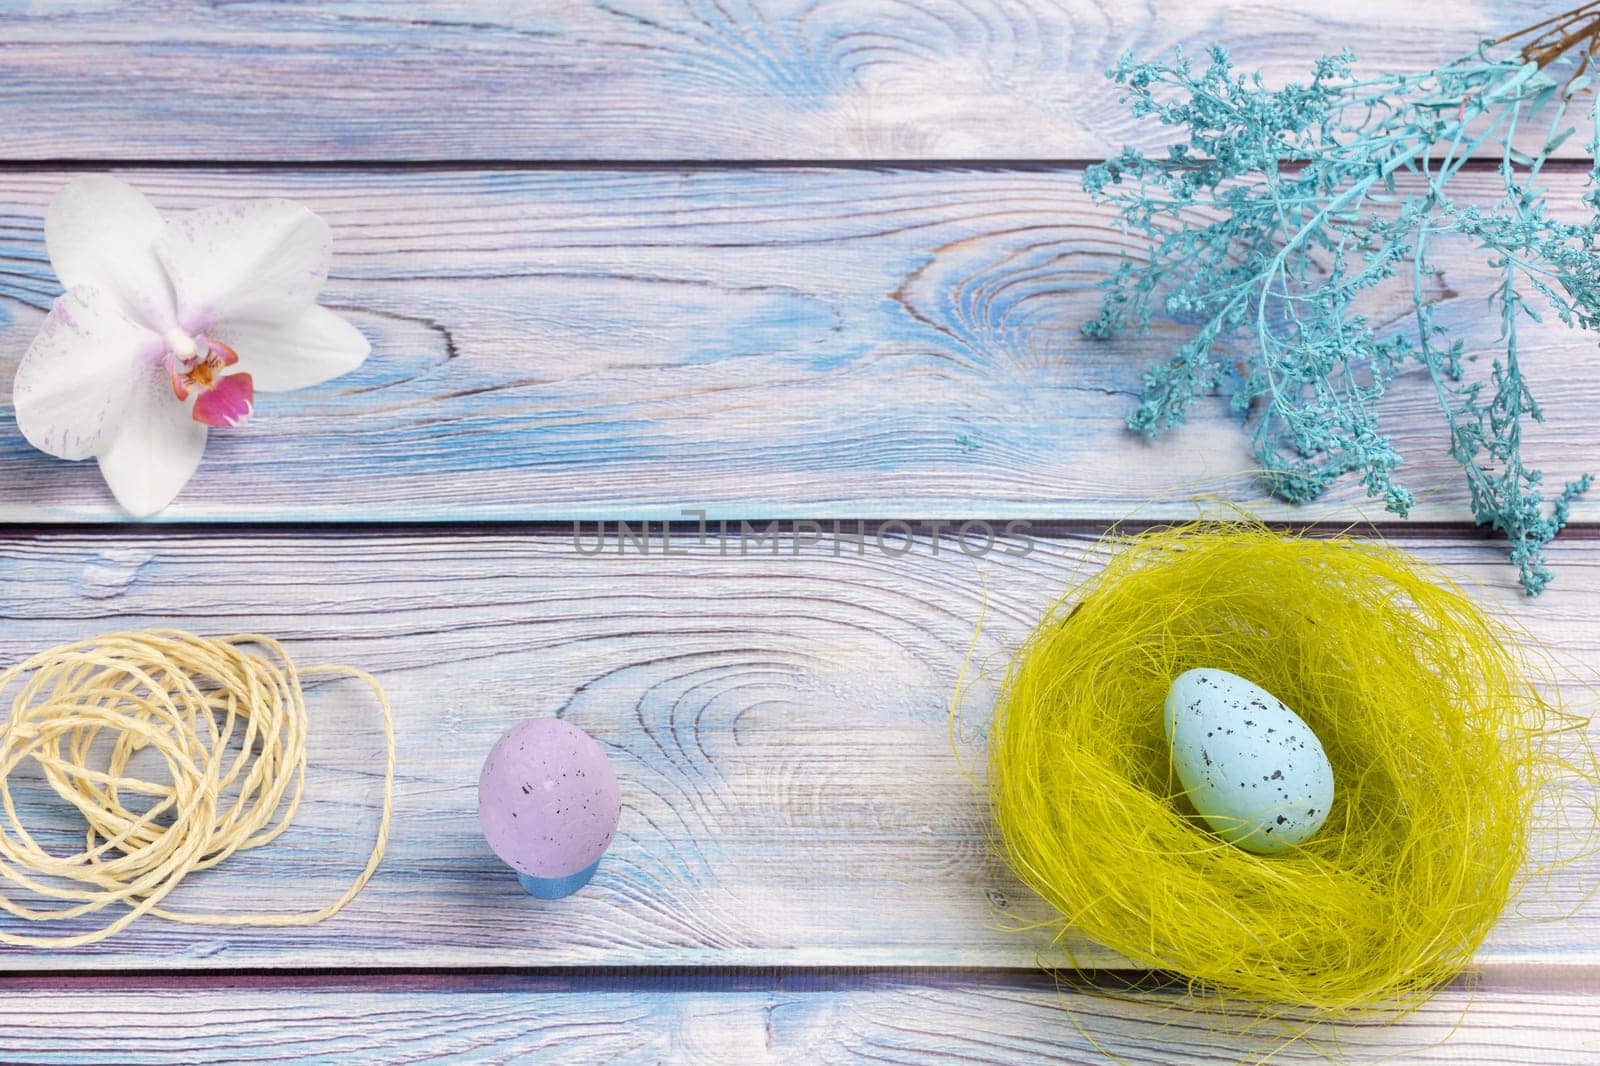 Nest with a colored Easter egg, an orchid flower and a rope on the boards with decorative plants. Top view.